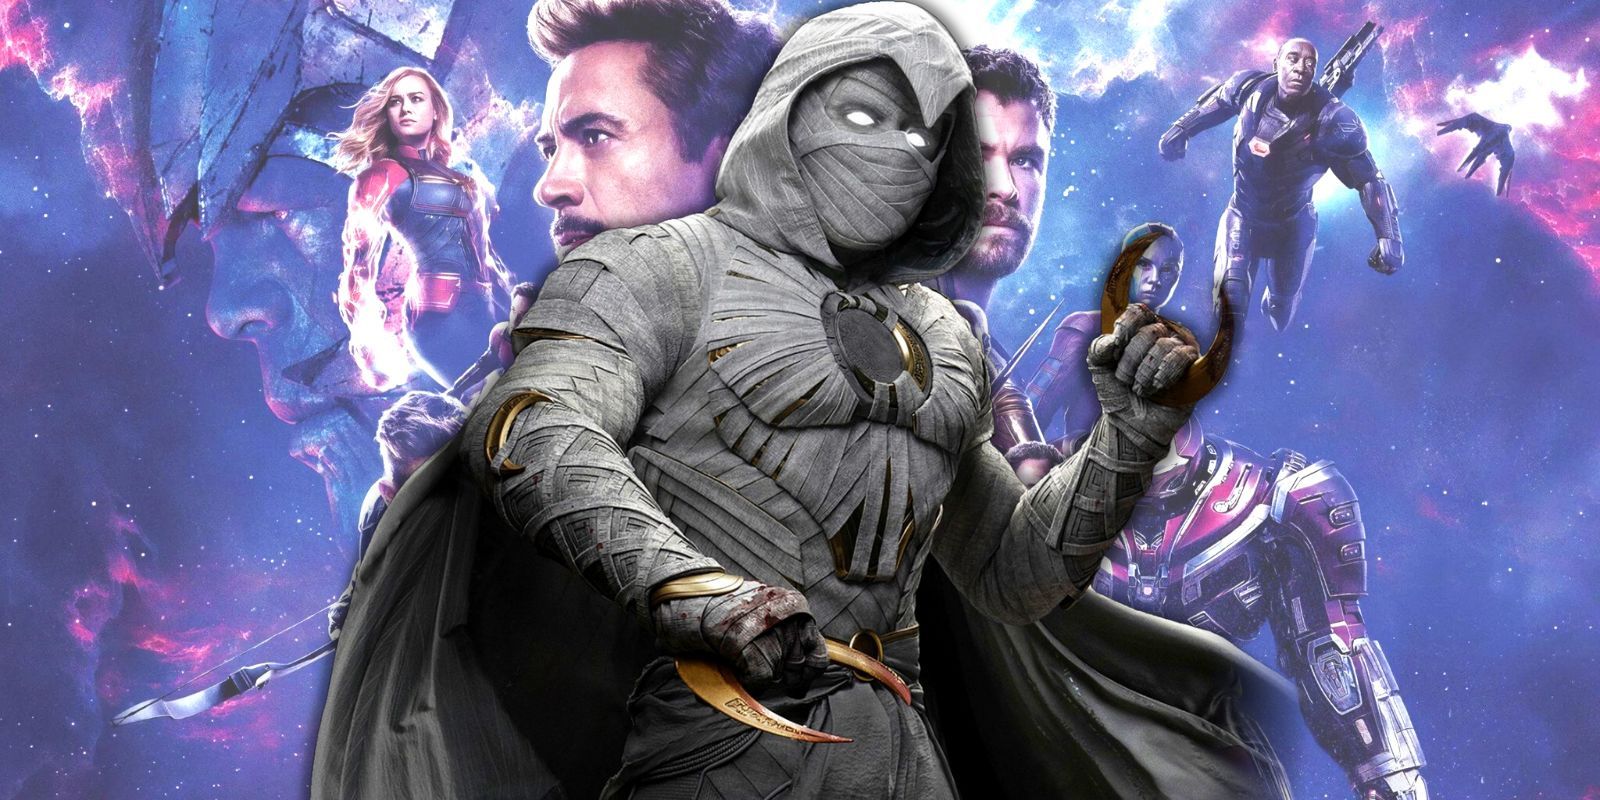 Oscar Isaac Says Ghost Rider Is the Marvel Hero Moon Knight Has to Fight